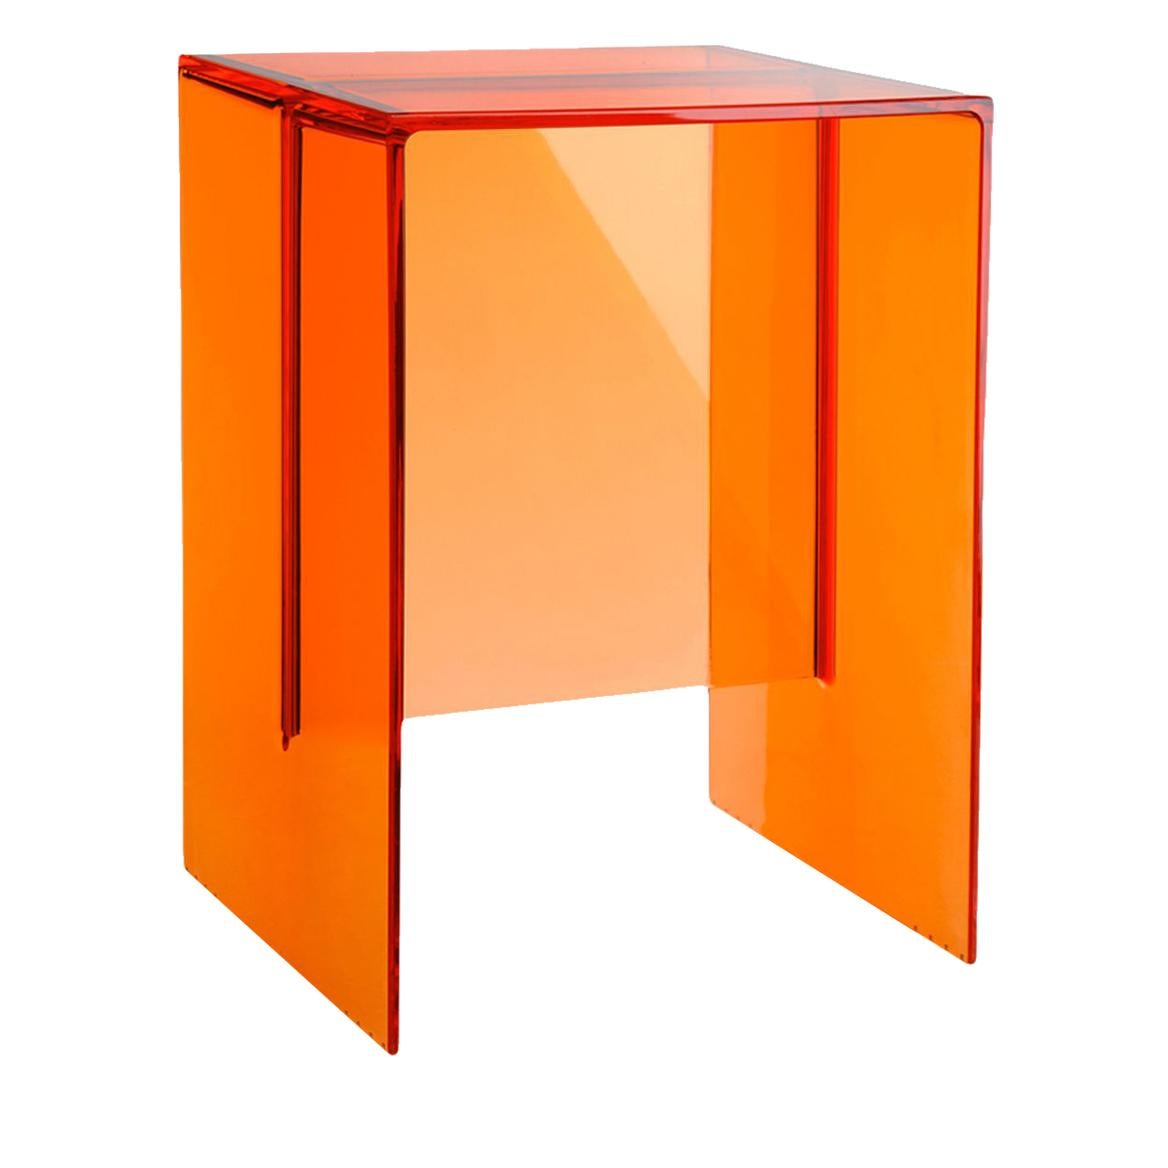 Kartell Max-Beam Side Table in Rust Orange by Ludovica and Roberto Palomba